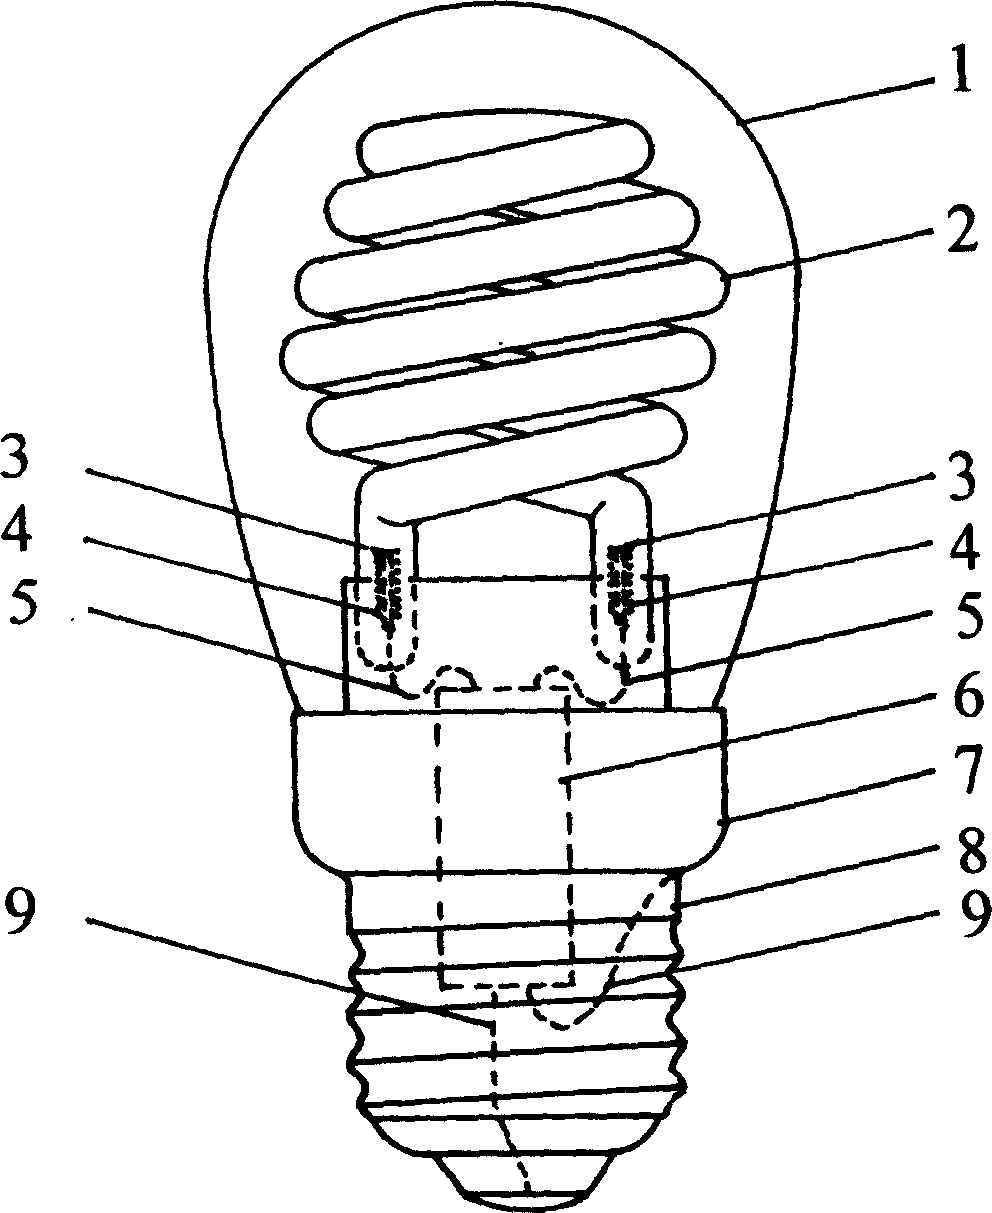 Helical type cold cathode fluorescence lamp